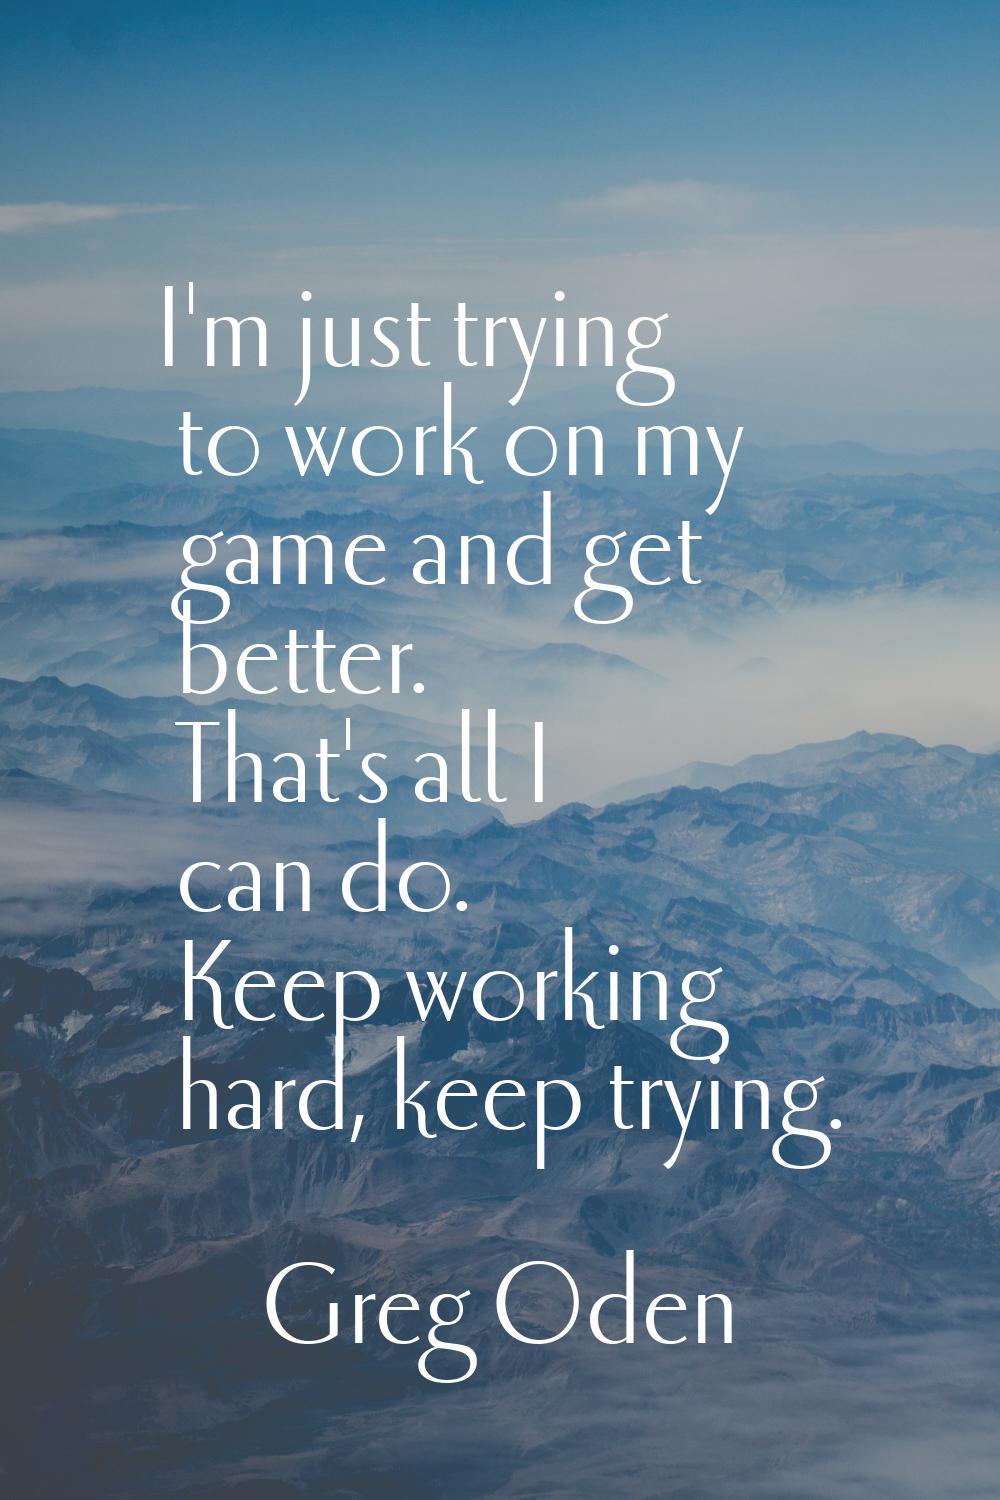 I'm just trying to work on my game and get better. That's all I can do. Keep working hard, keep try